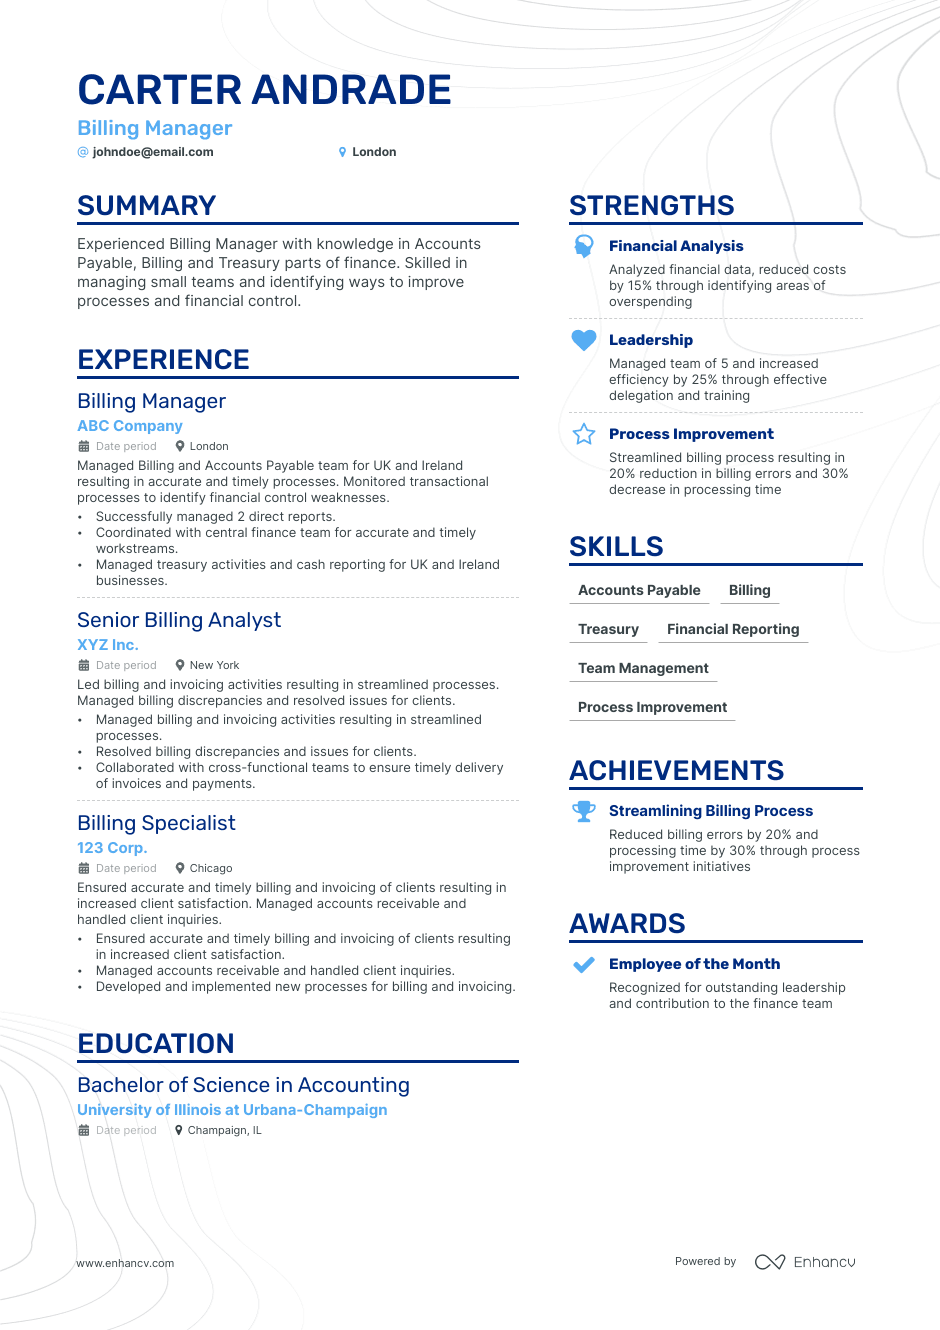 Billing Manager resume example